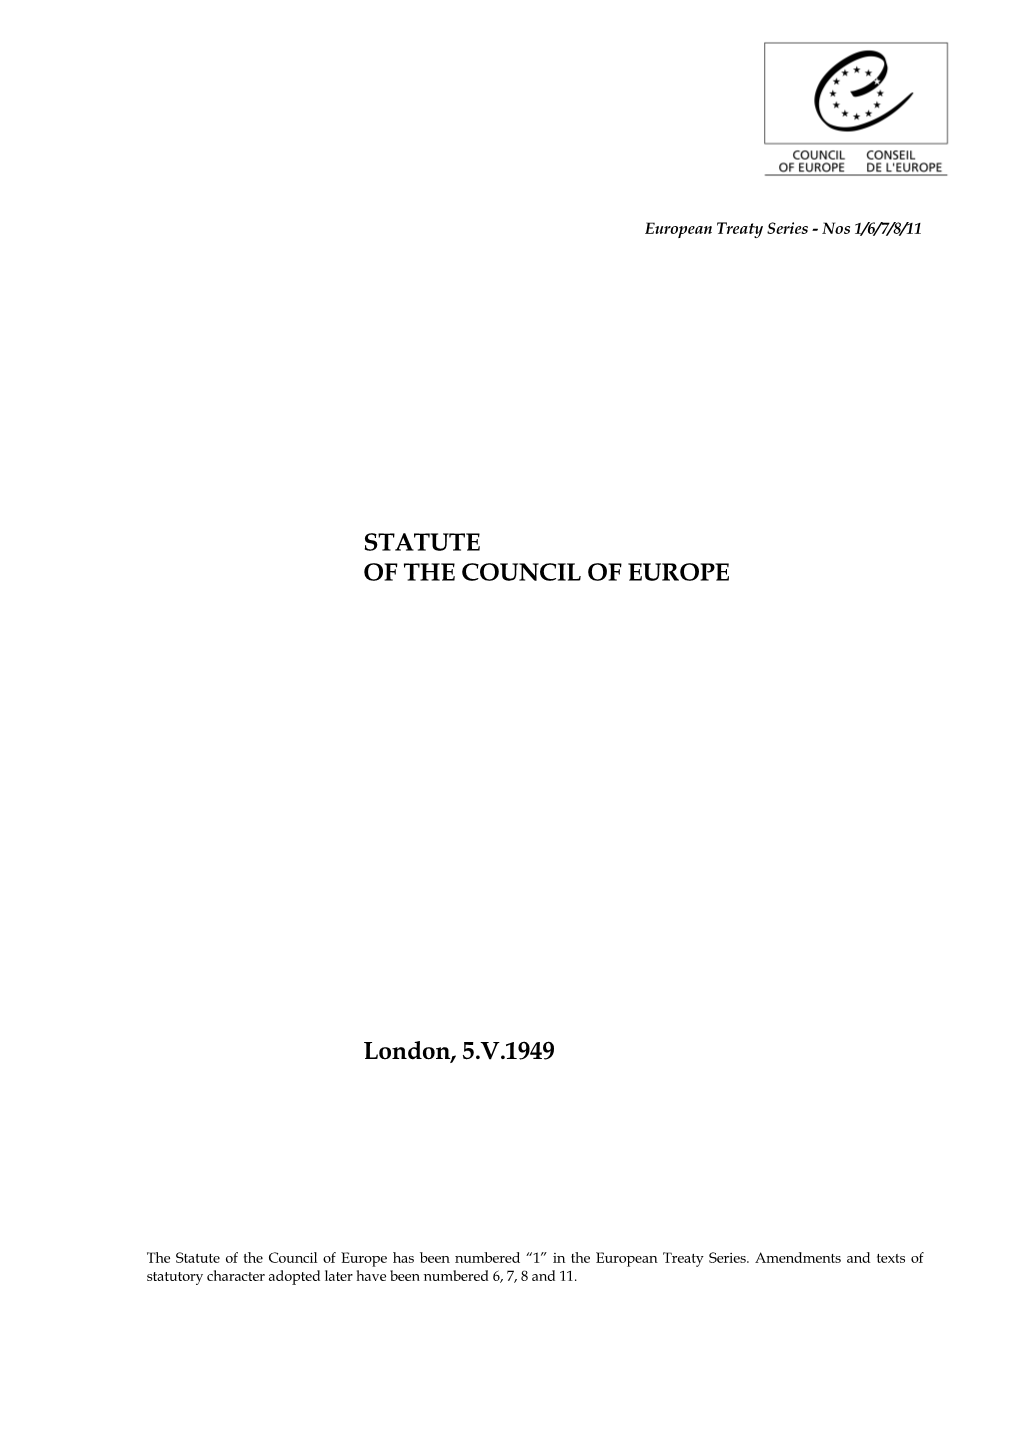 Statute of the Council of Europe (ETS No. 001)